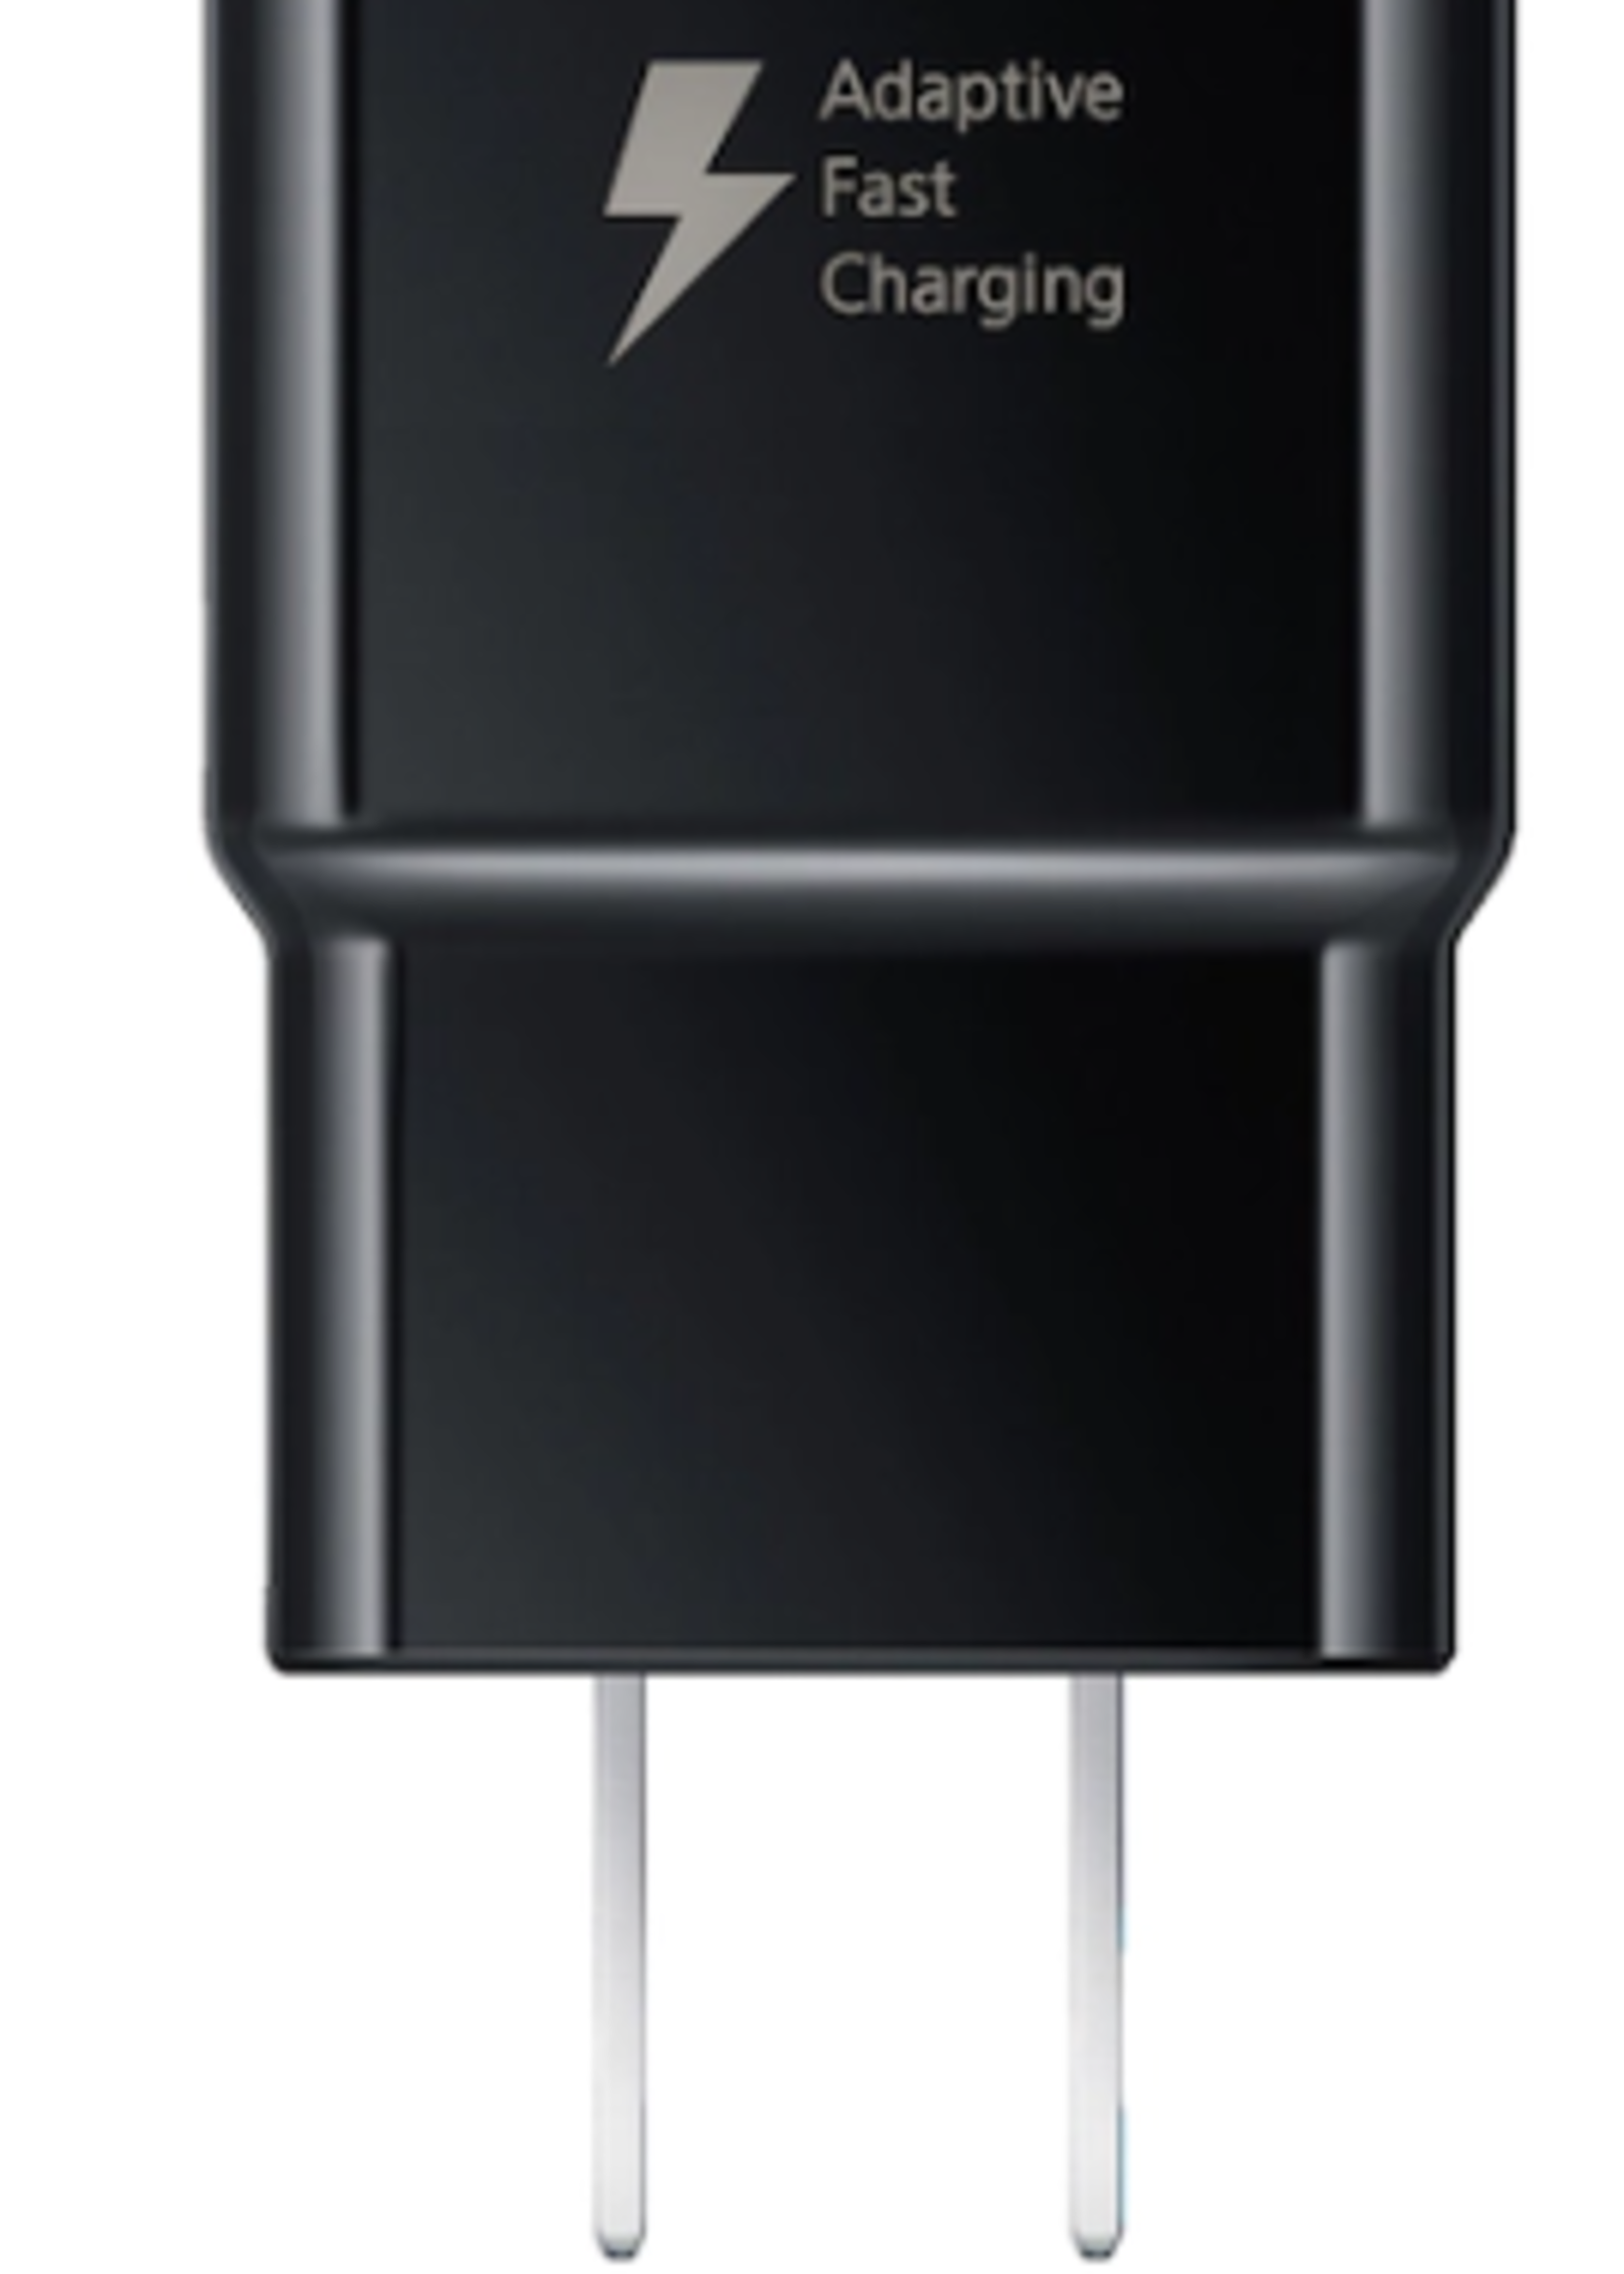 Samsung Samsung Travel Charger USB 2AMP Power Plug with Type C Data Cable Black Retail ( Adaptive Fast Charging )